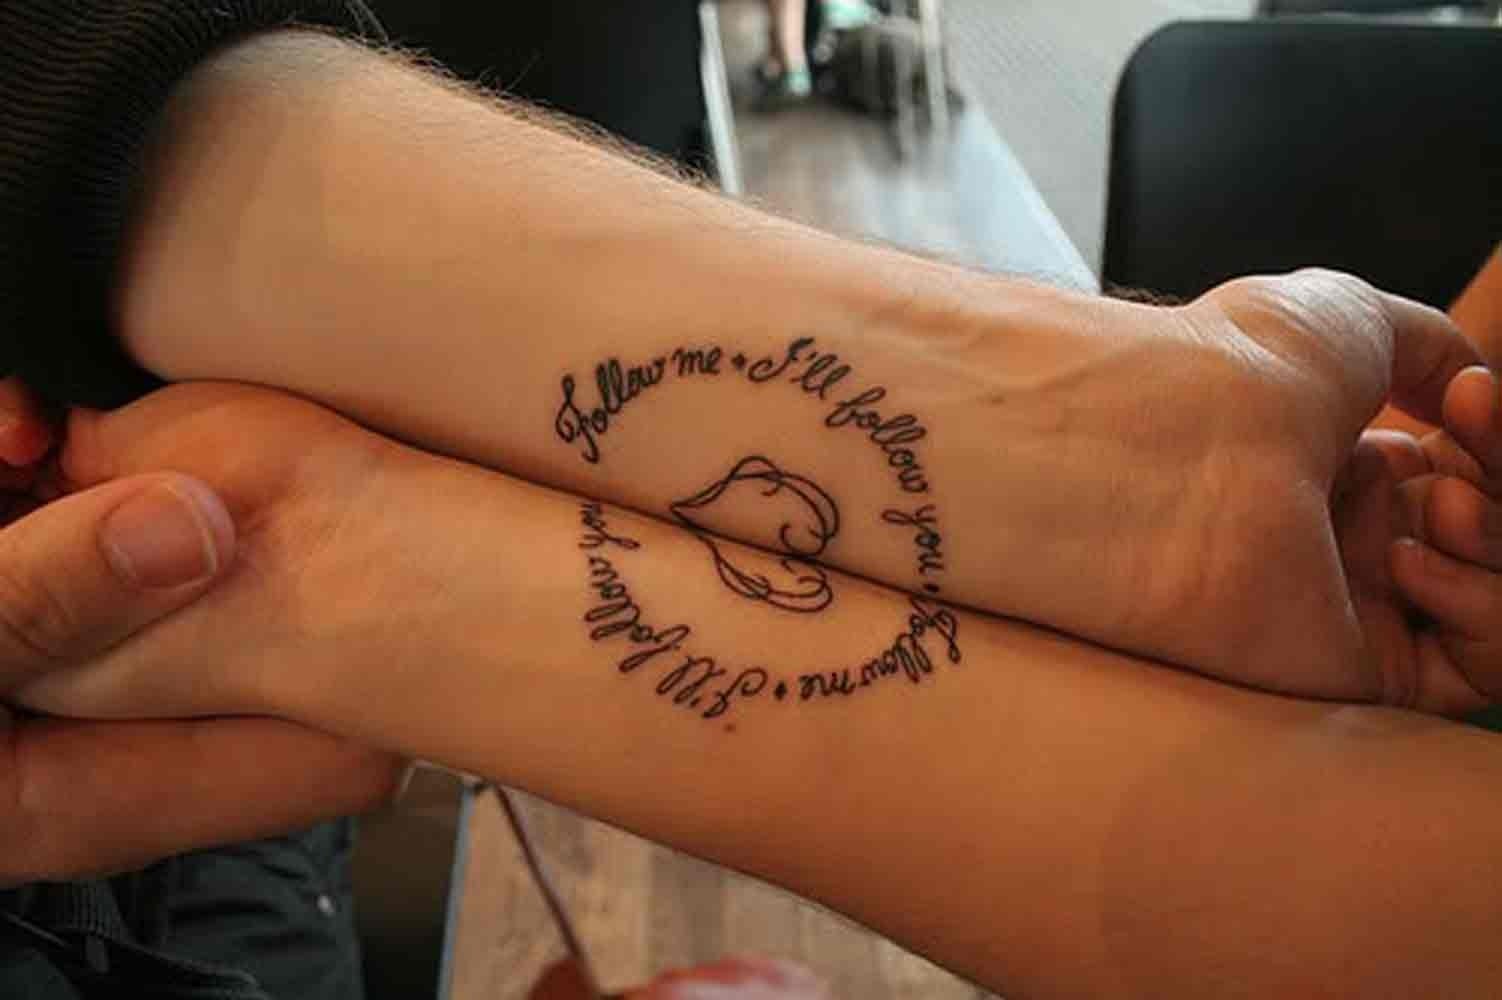 10 Spectacular His And Her Tattoo Ideas his and her tattoos ideas http pictrends tattoos his and her 2022